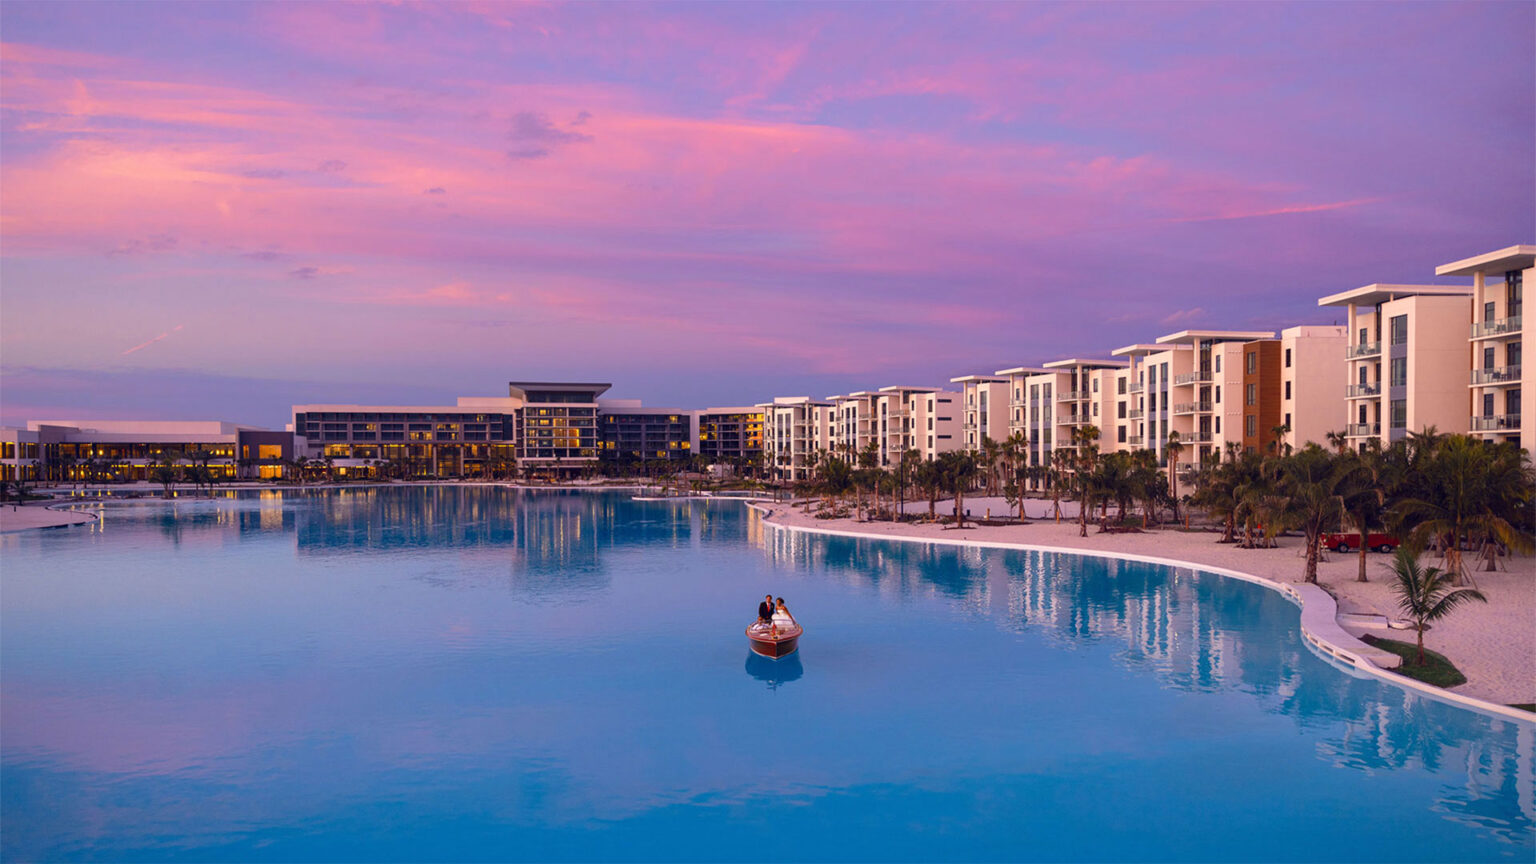 Evermore Orlando Resort stars a Crystal Lagoons Amenity at it's center